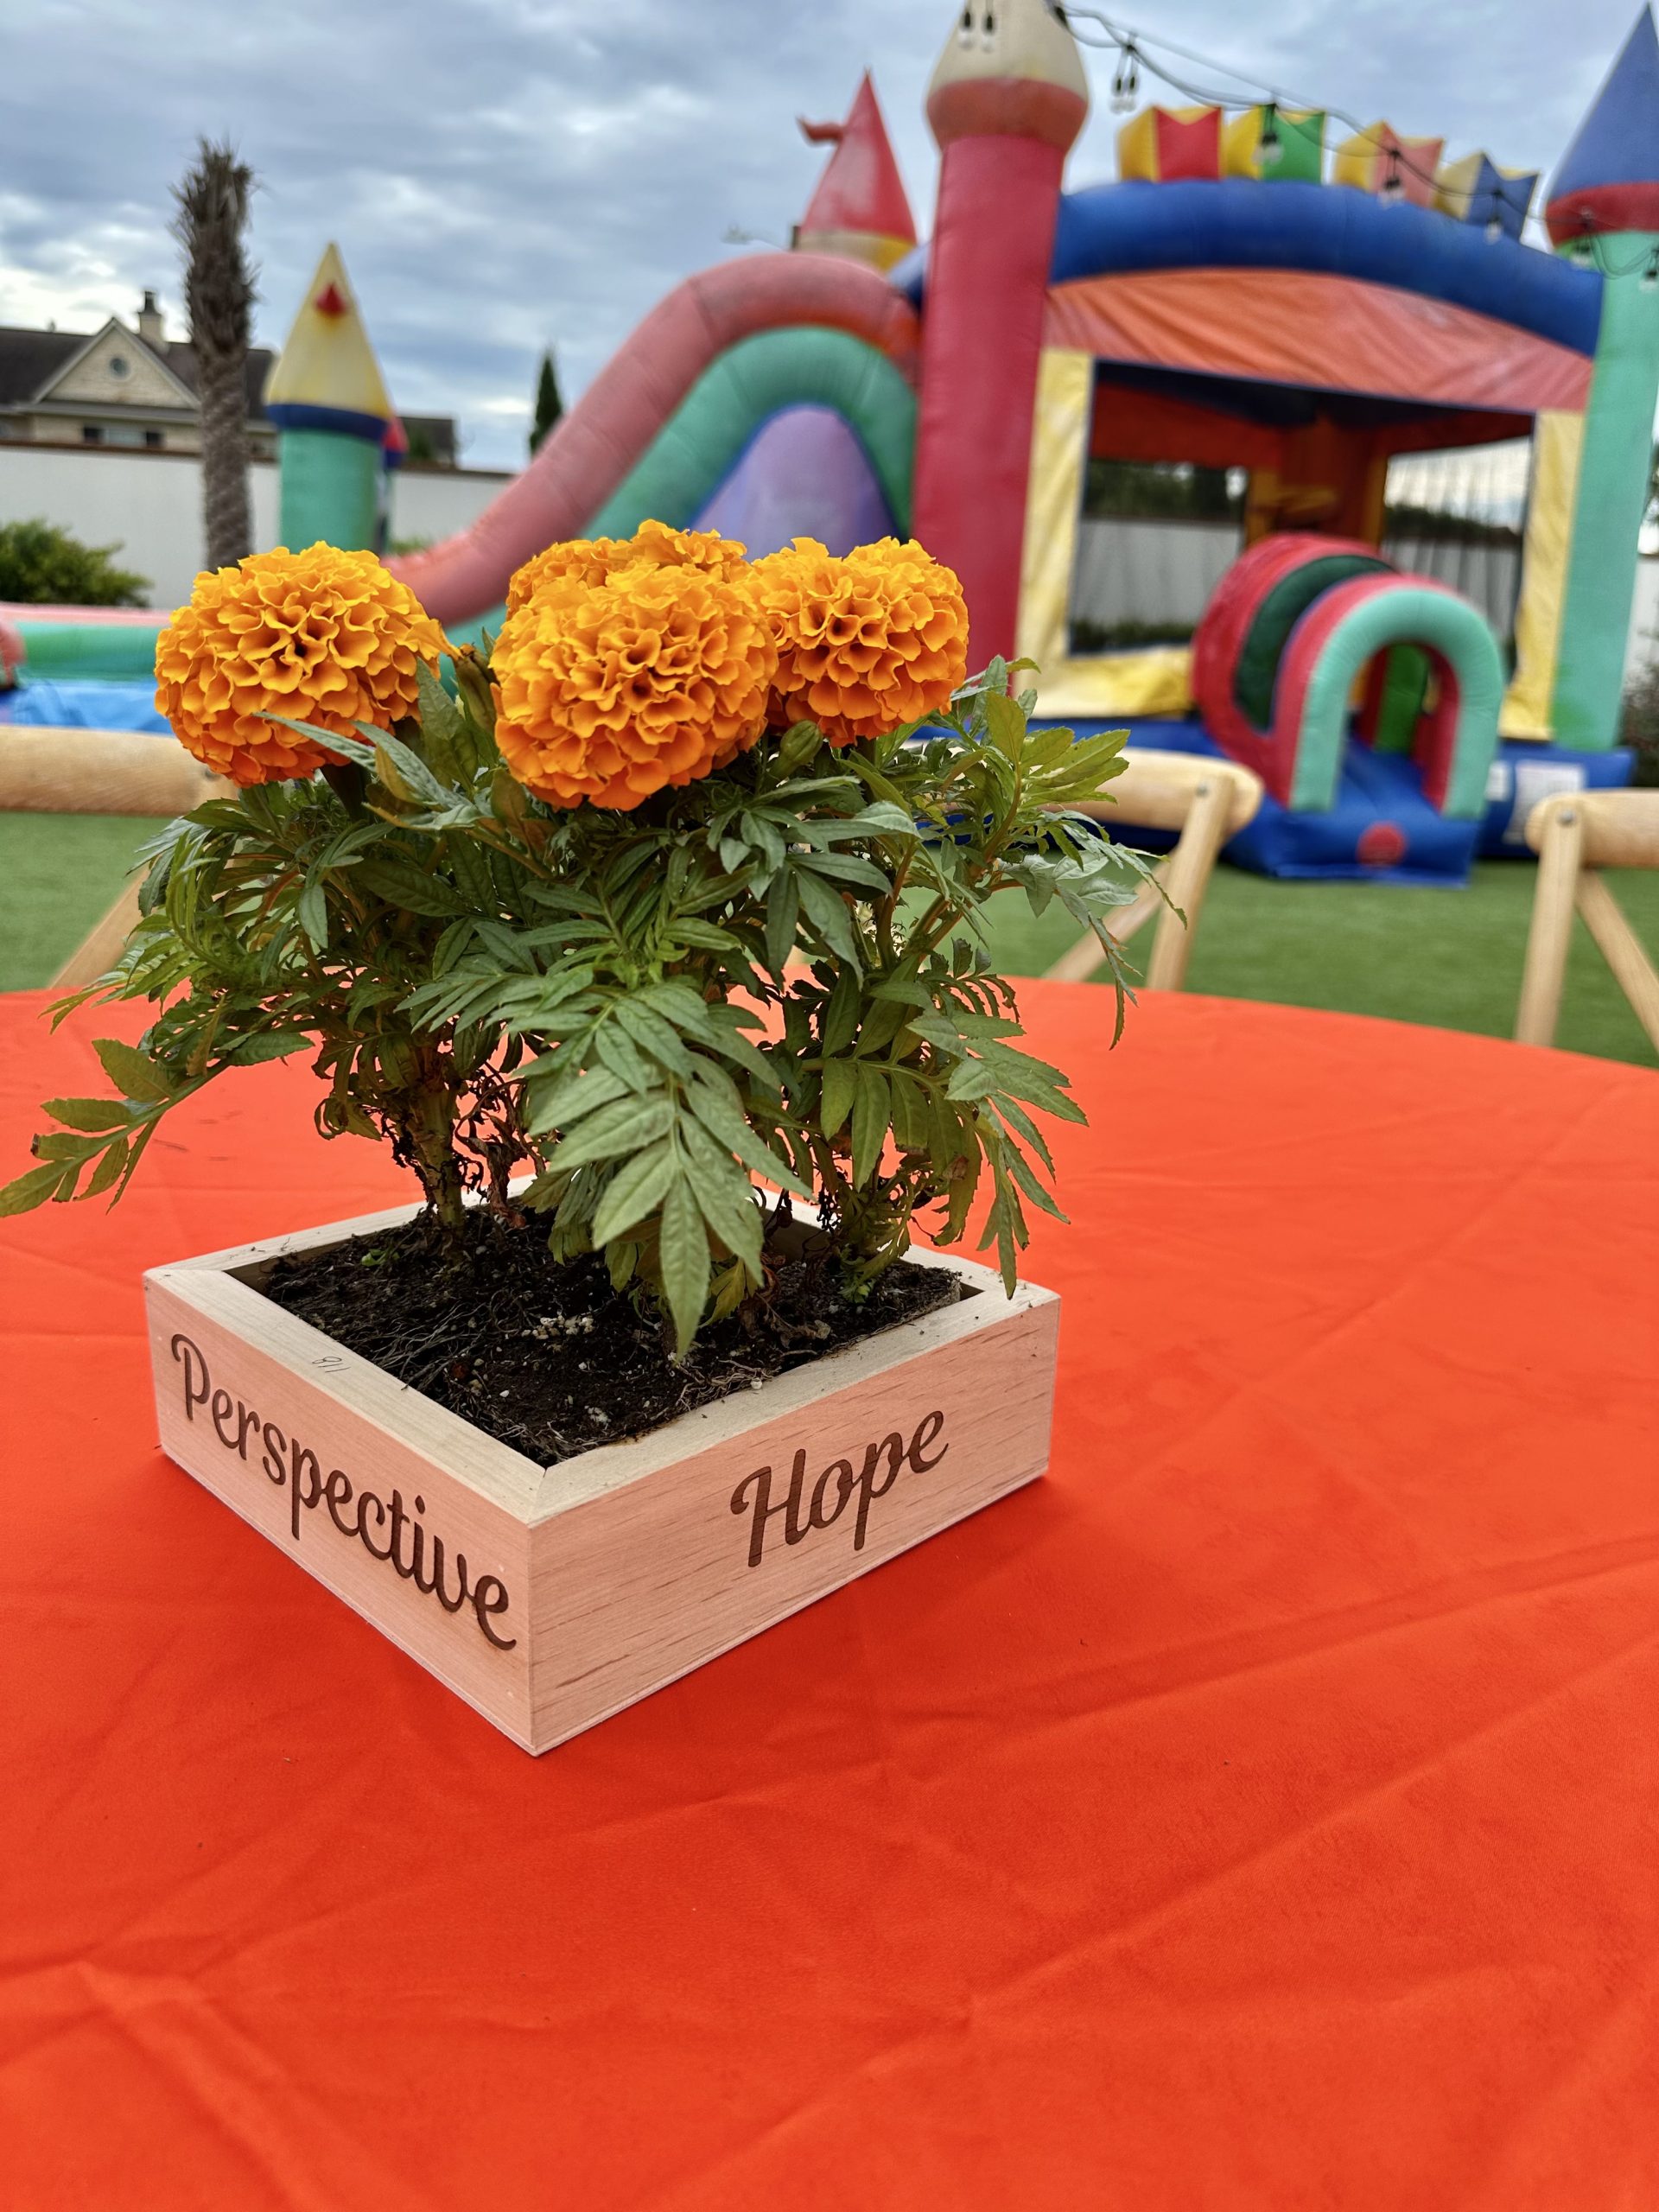 Image of orange marigolds in a wooden planter. There is a colorful bounce house in the background.